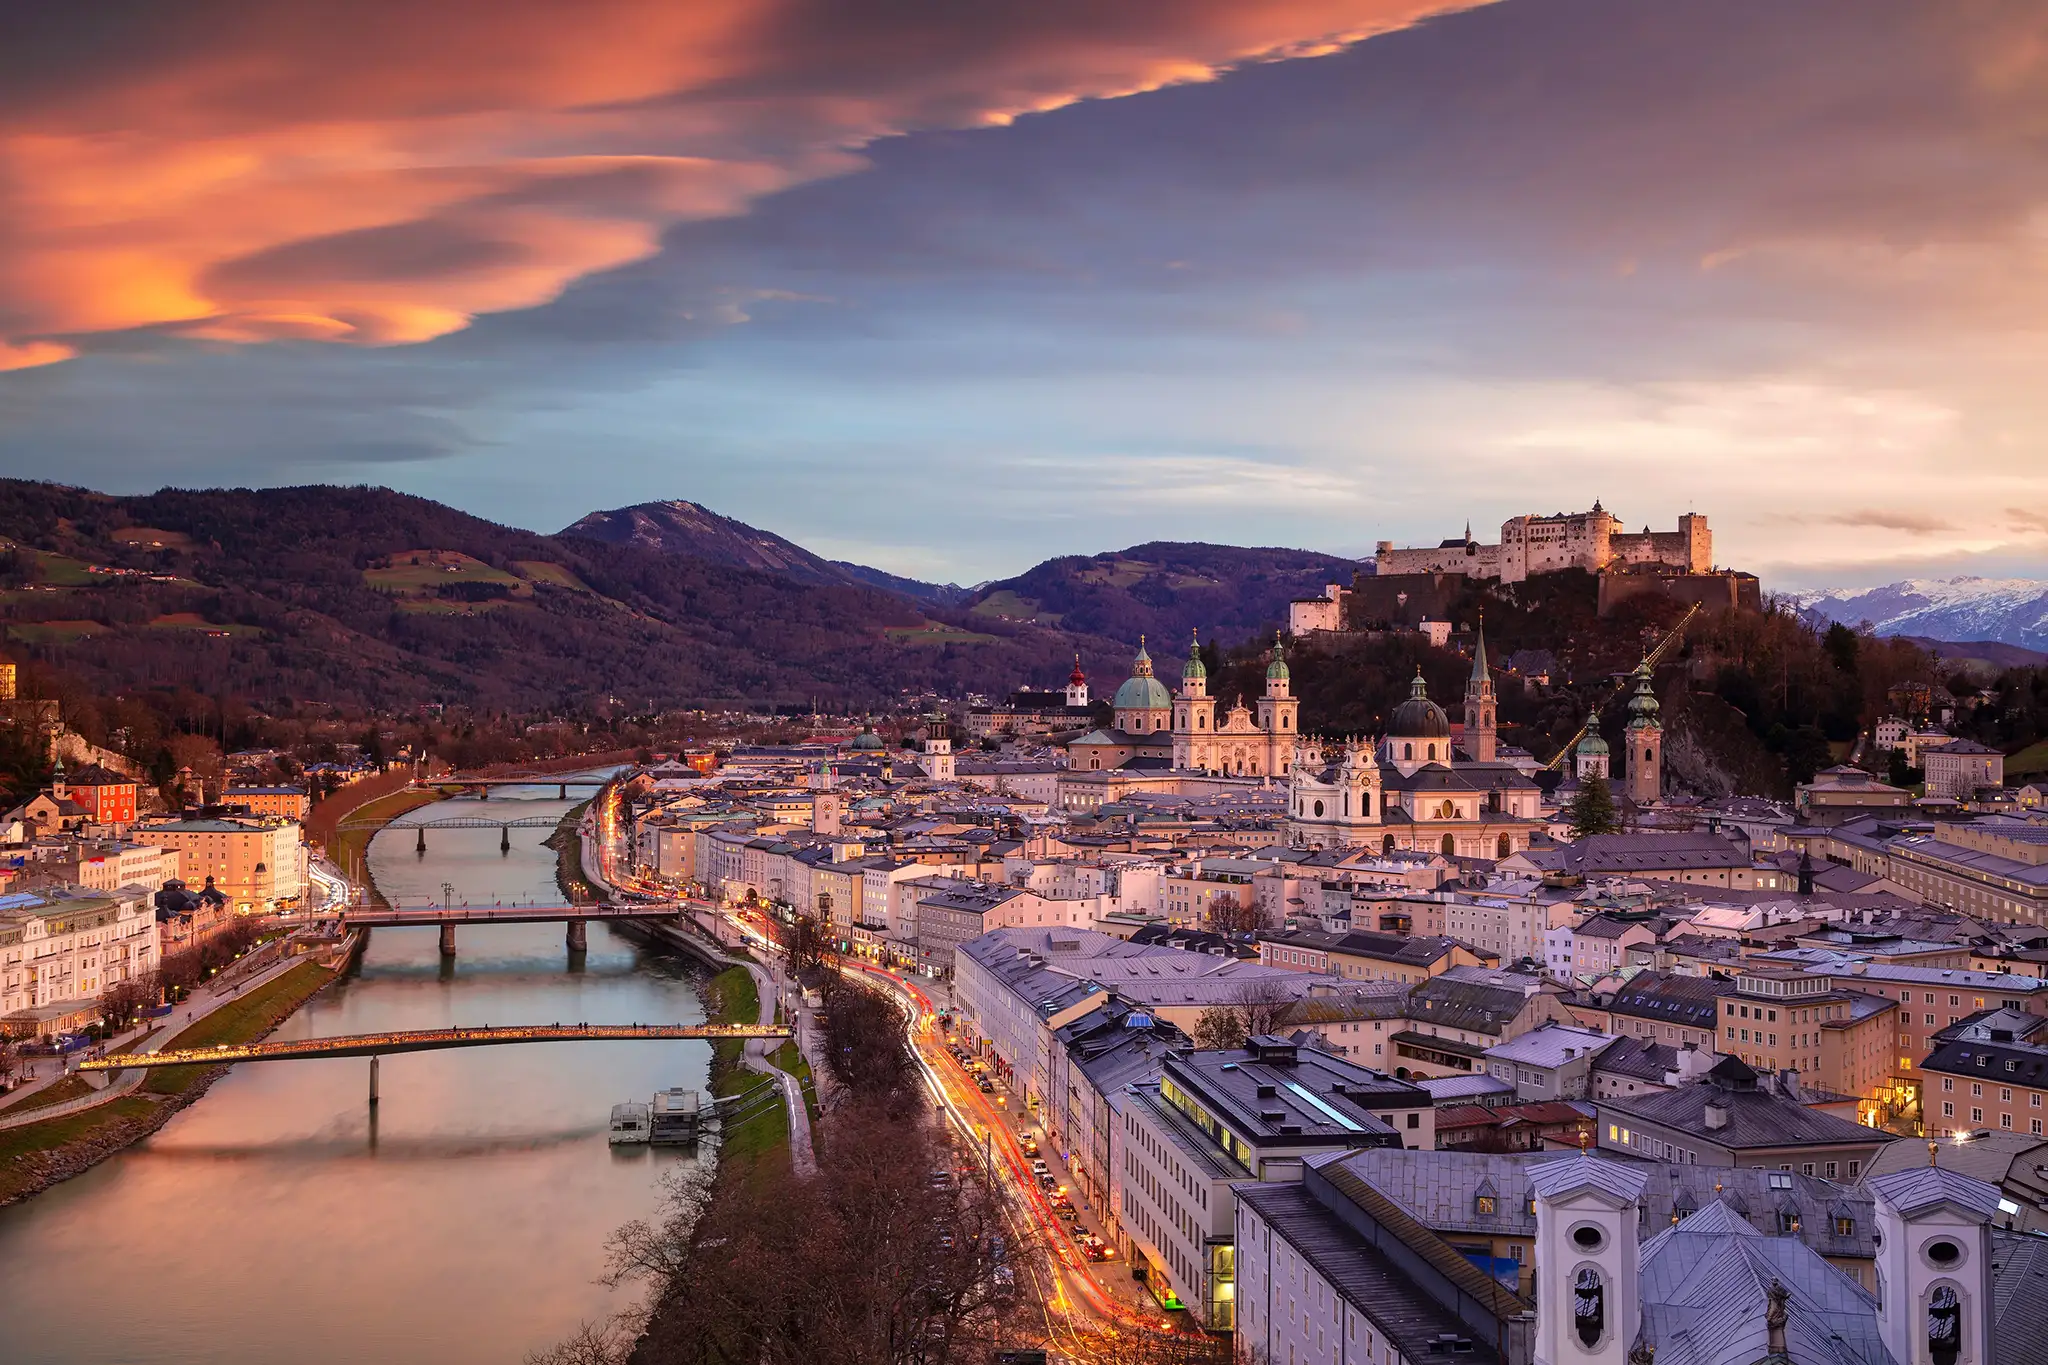 Image of Salzburg, Austria with Salzburg Cathedral during beautiful winter sunset.